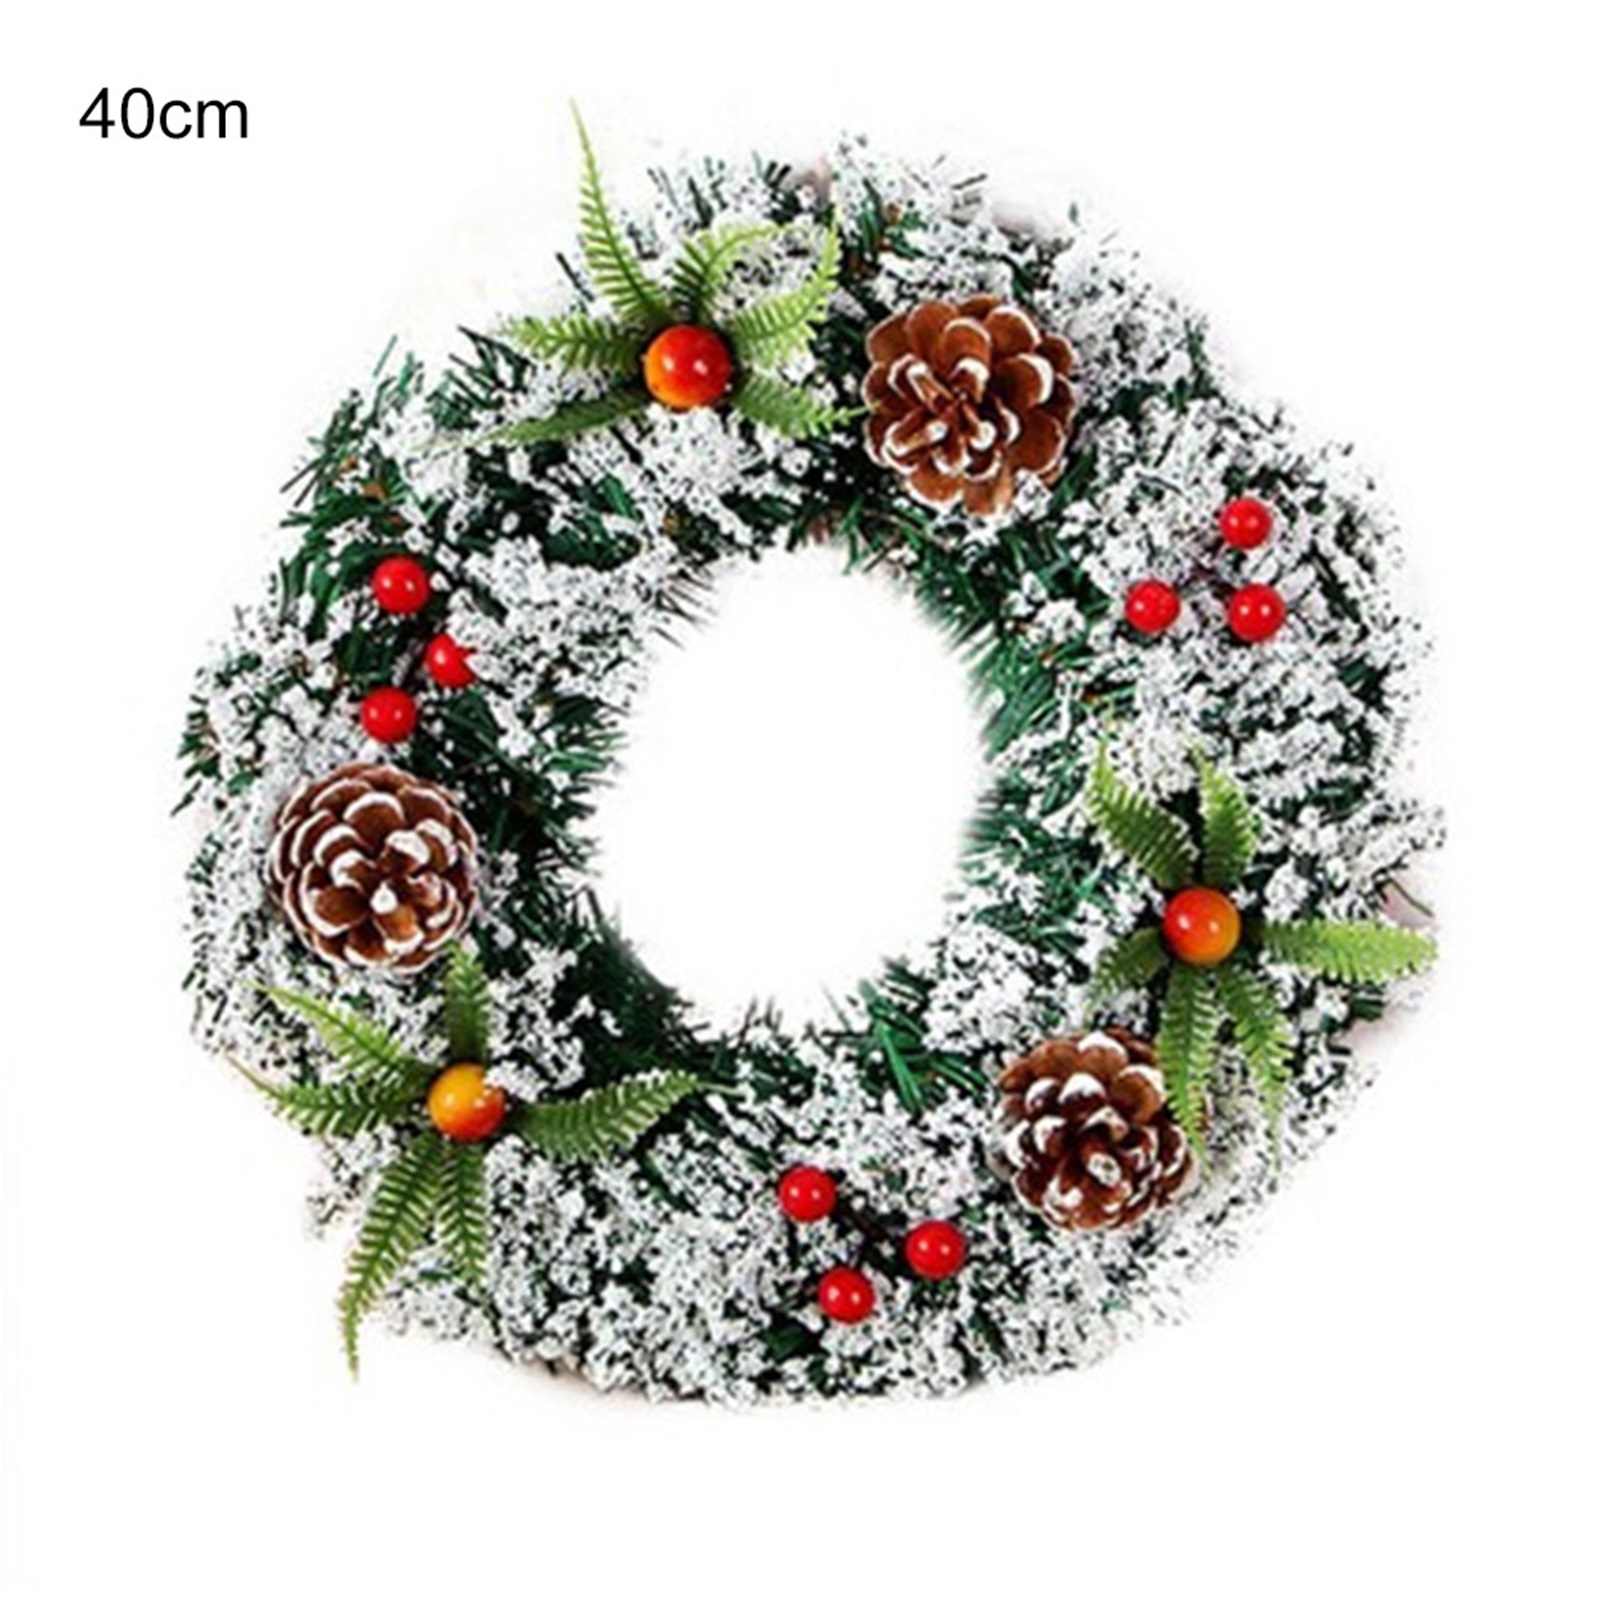 Garland Decor Wall For Xmas Party Ornaments Door Home Flower Wreath Christmas 